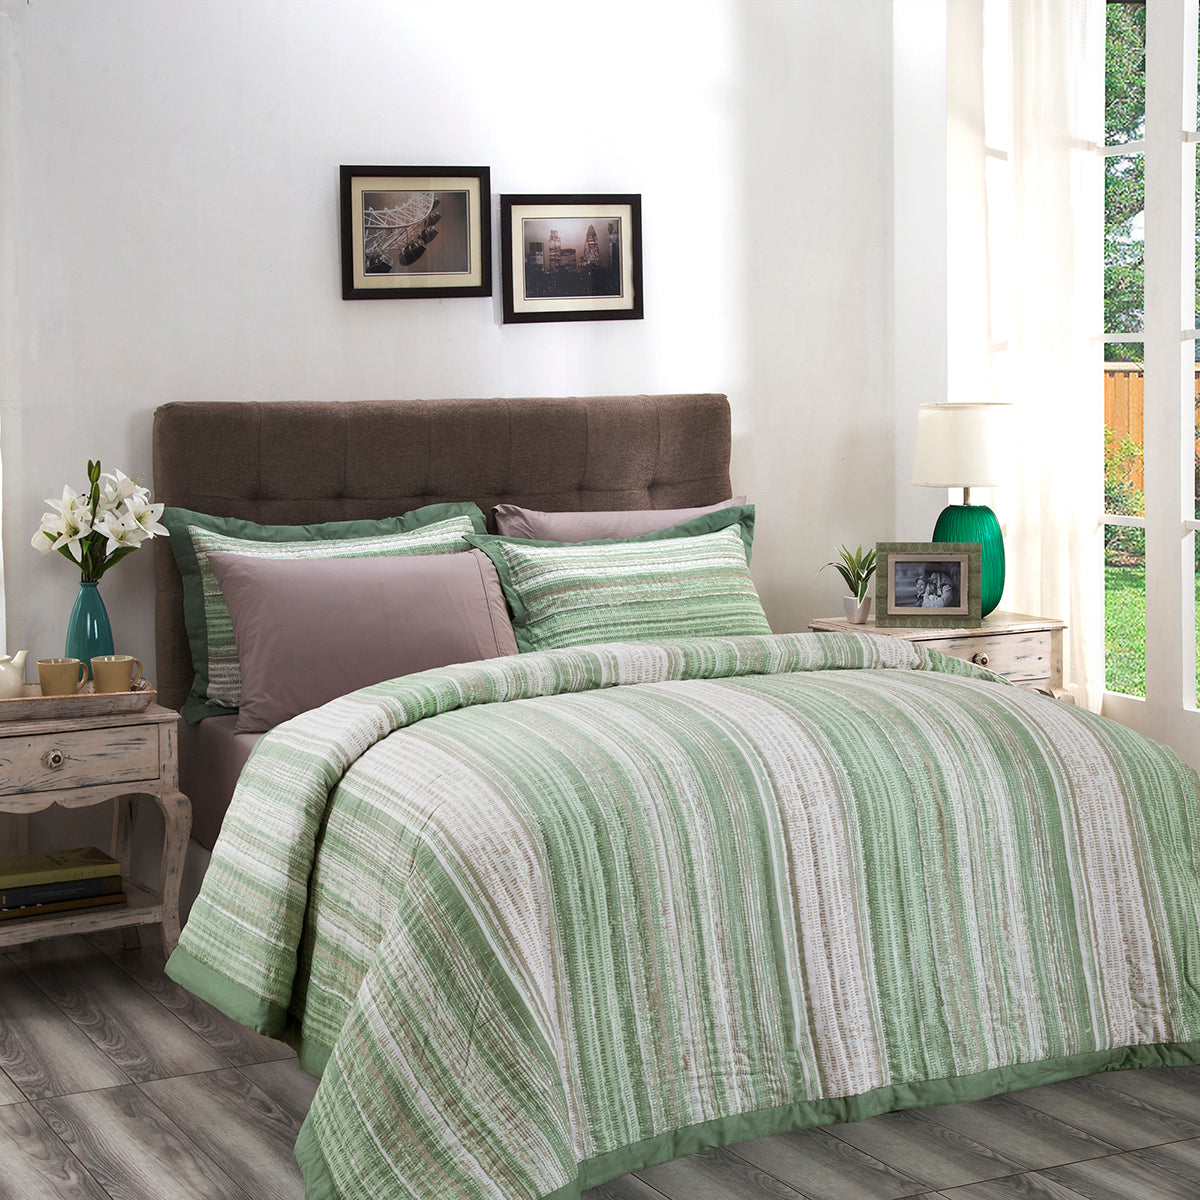 Patina Impression Rugged Stripes Hand Quilted Summer AC Quilt/Quilted Bed Cover/Comforter Green